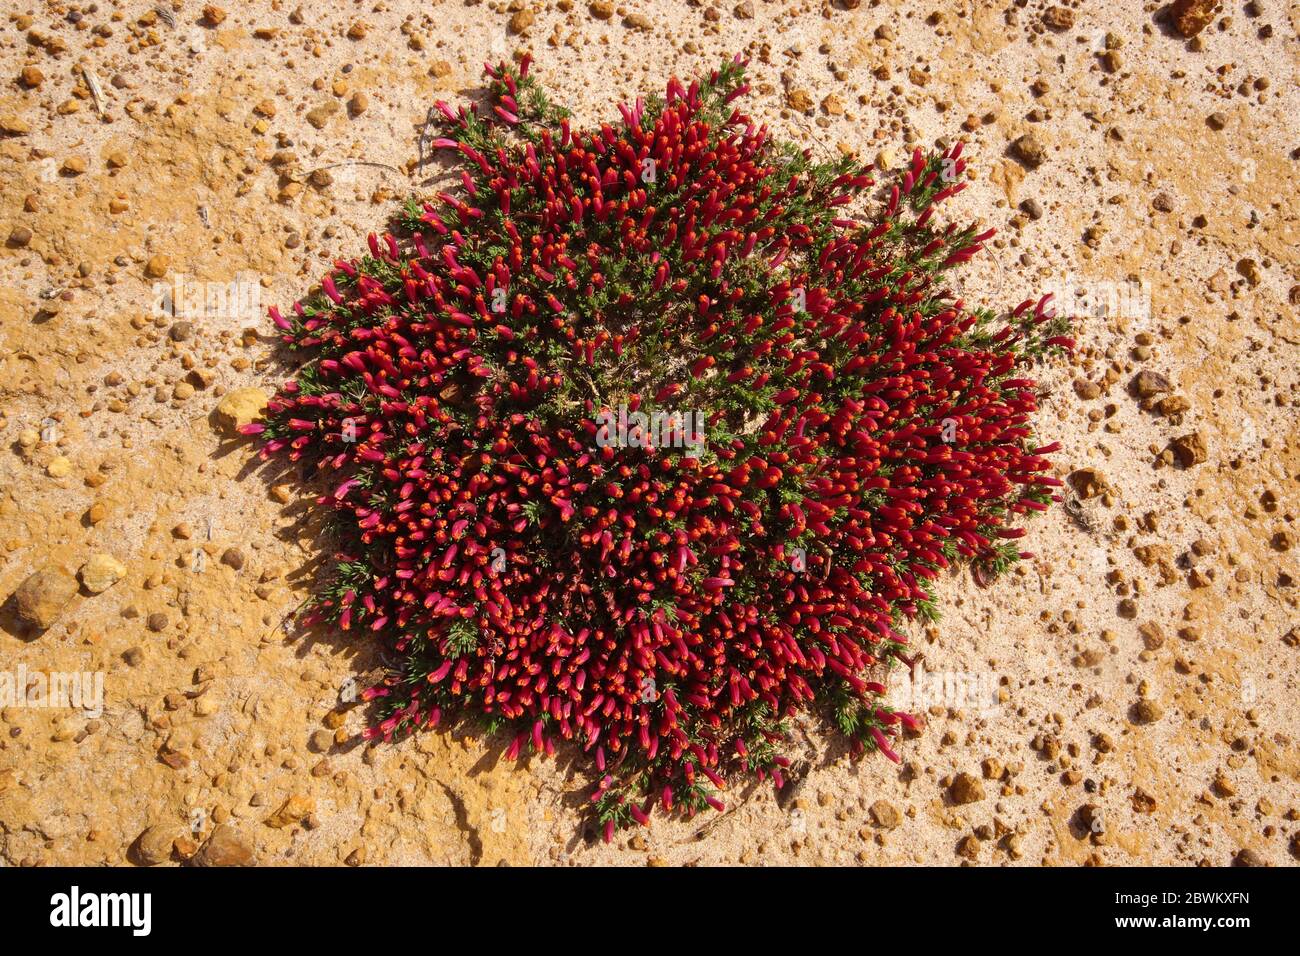 Australian wildflowers: Geometric round patch of Lechenaultia tubiflora with red flowers, in gravel and sand, Western Australia, view from above Stock Photo